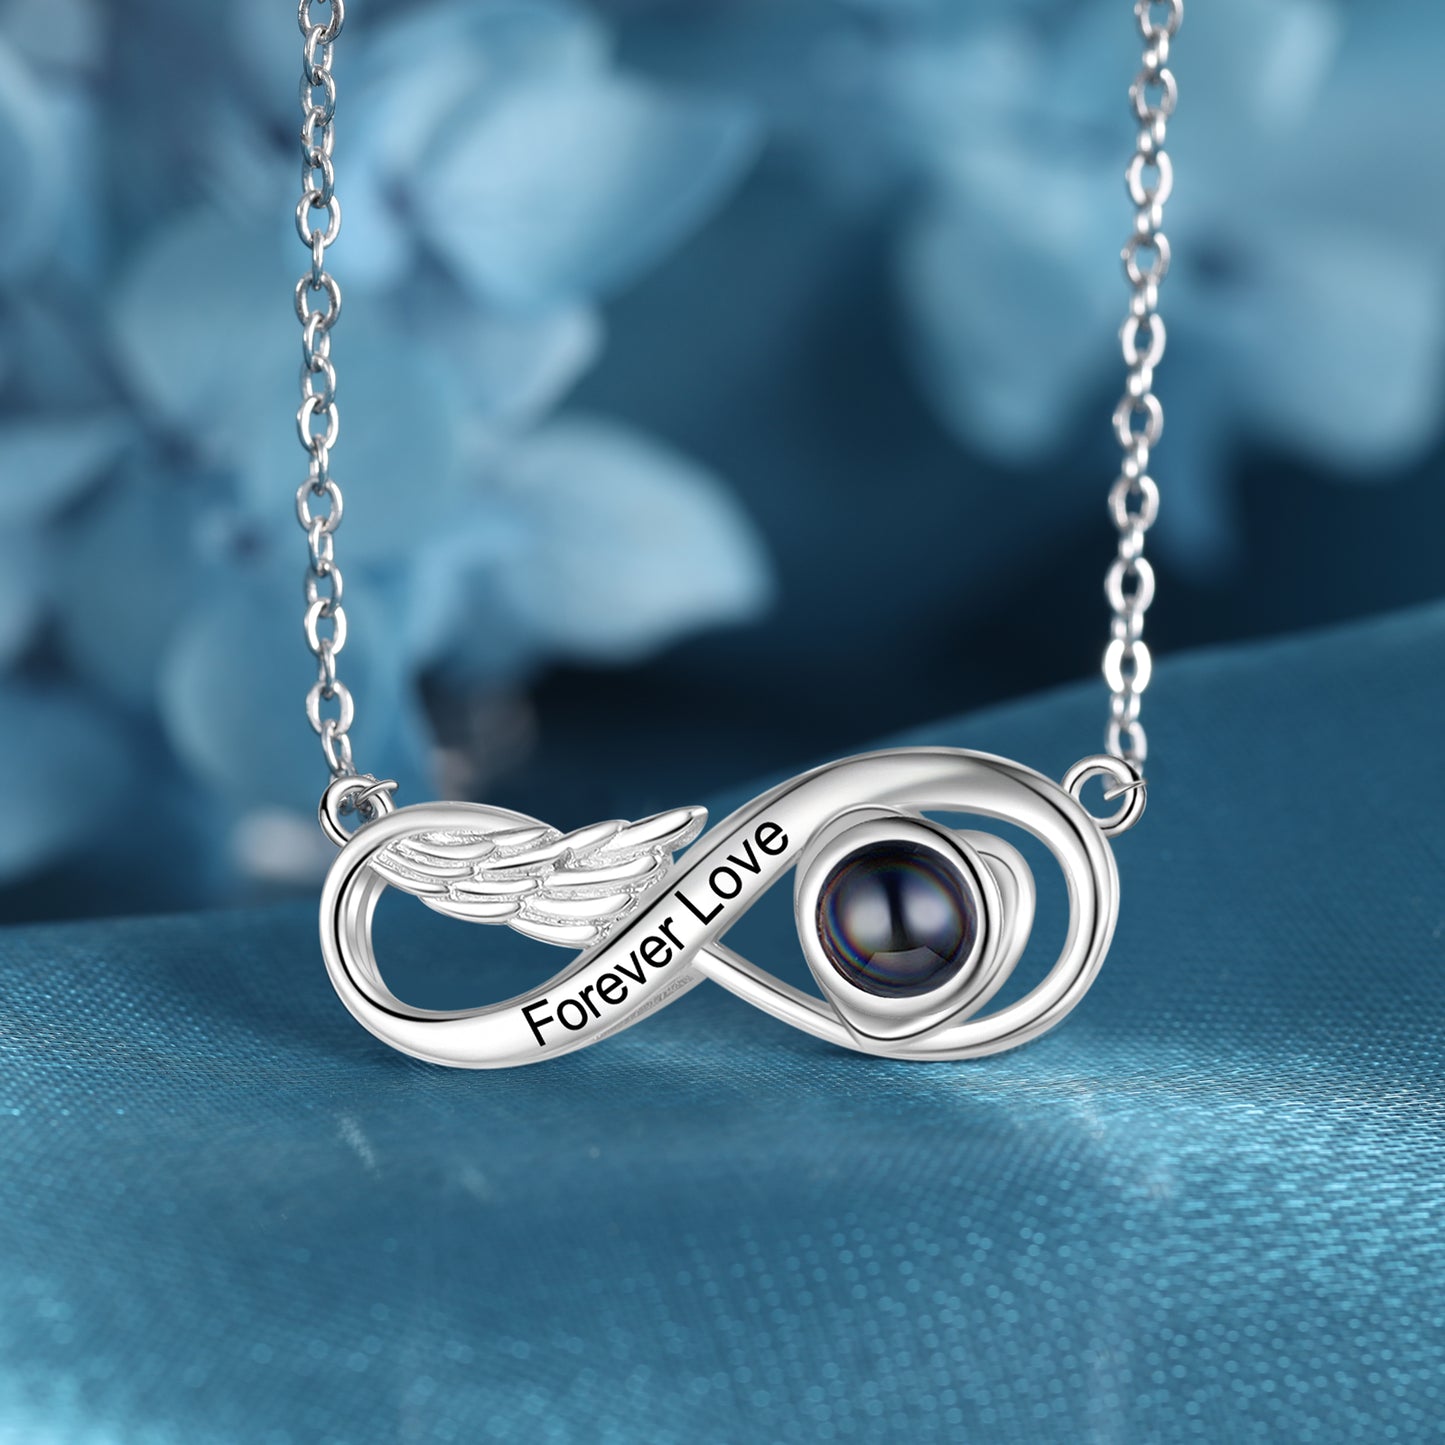 Custom Photo Projection Necklace with Infinity